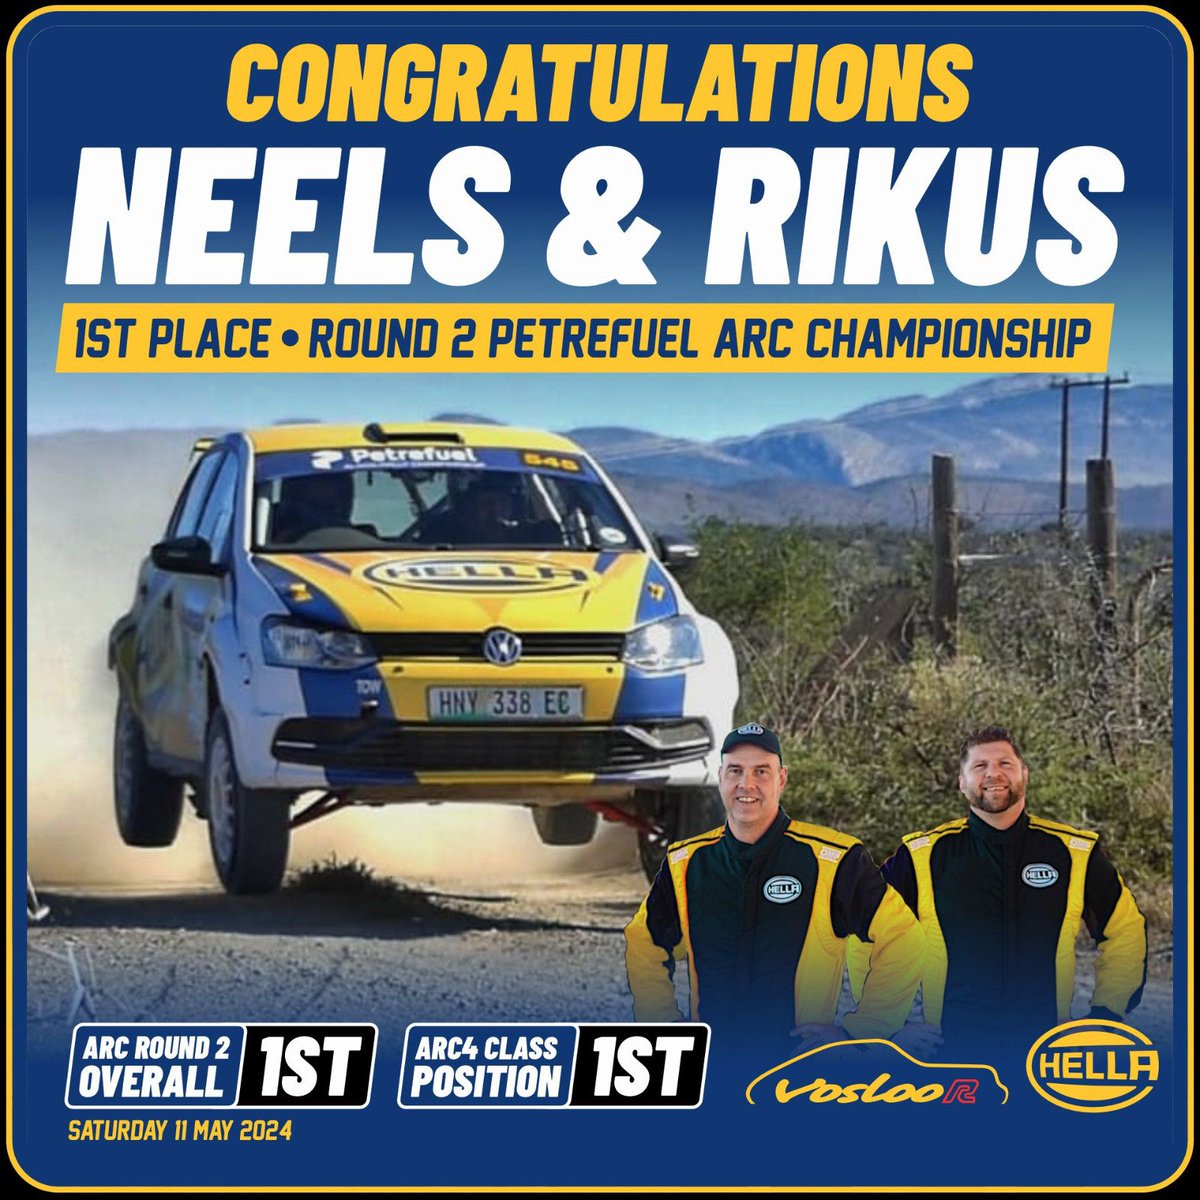 What a #rally and what a result! The #EMI #Paardepoort rally has been very good to us. We are thankful for a clean run and a good result in Round 2 of the #Petrefuel @algoarallyclub Championship

#Hella #HELLAAthlete  #rallying #VoslooR #VWPolo